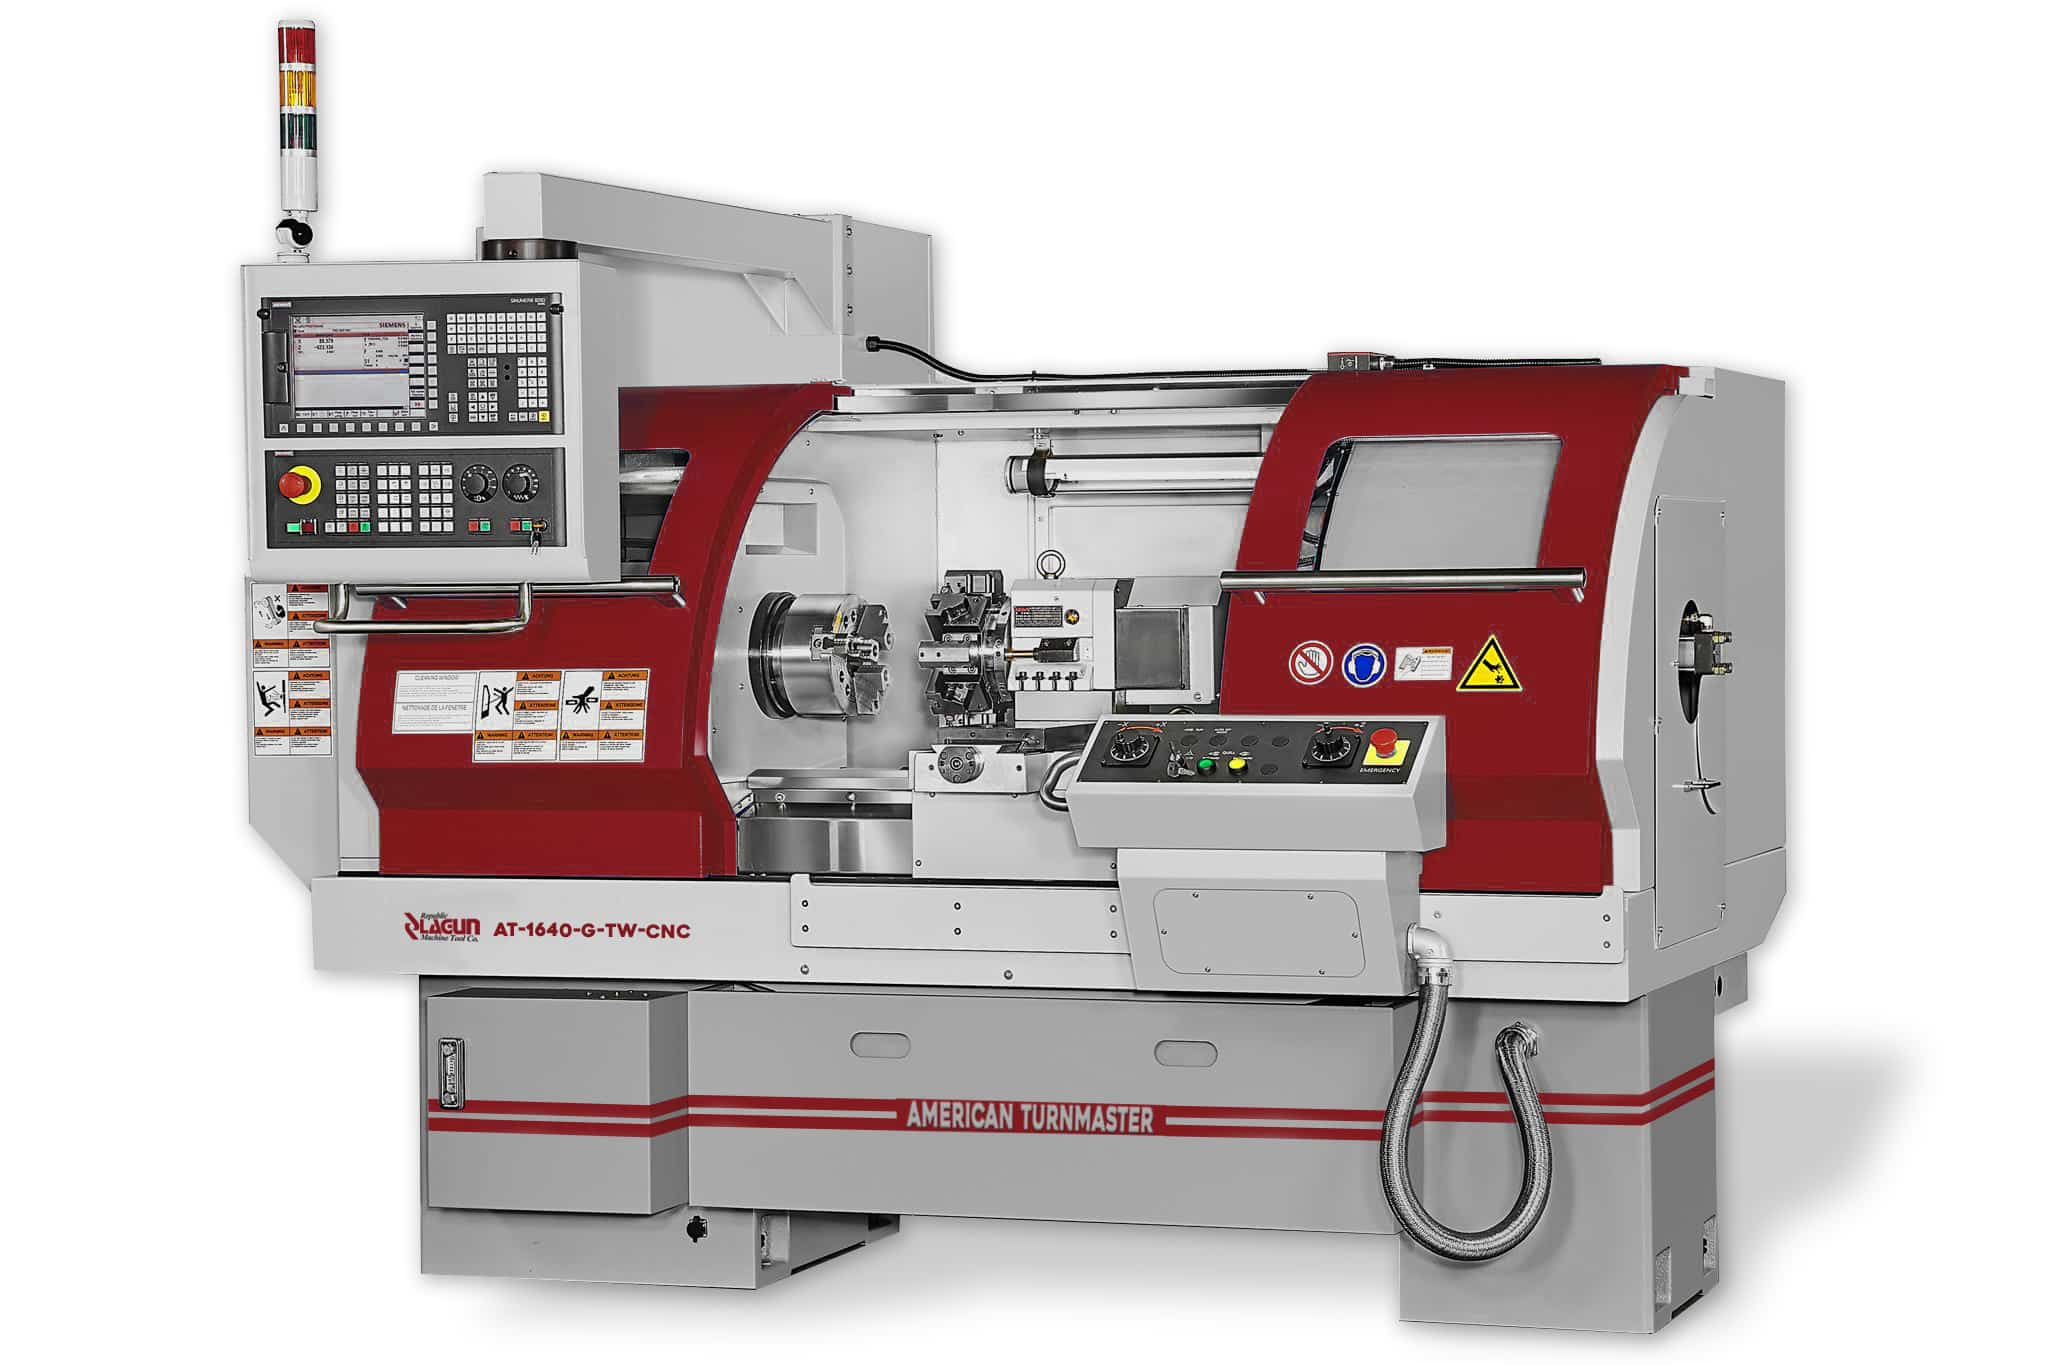 AT-1660-G-TW-CNC Gear Head Lathe Product Image